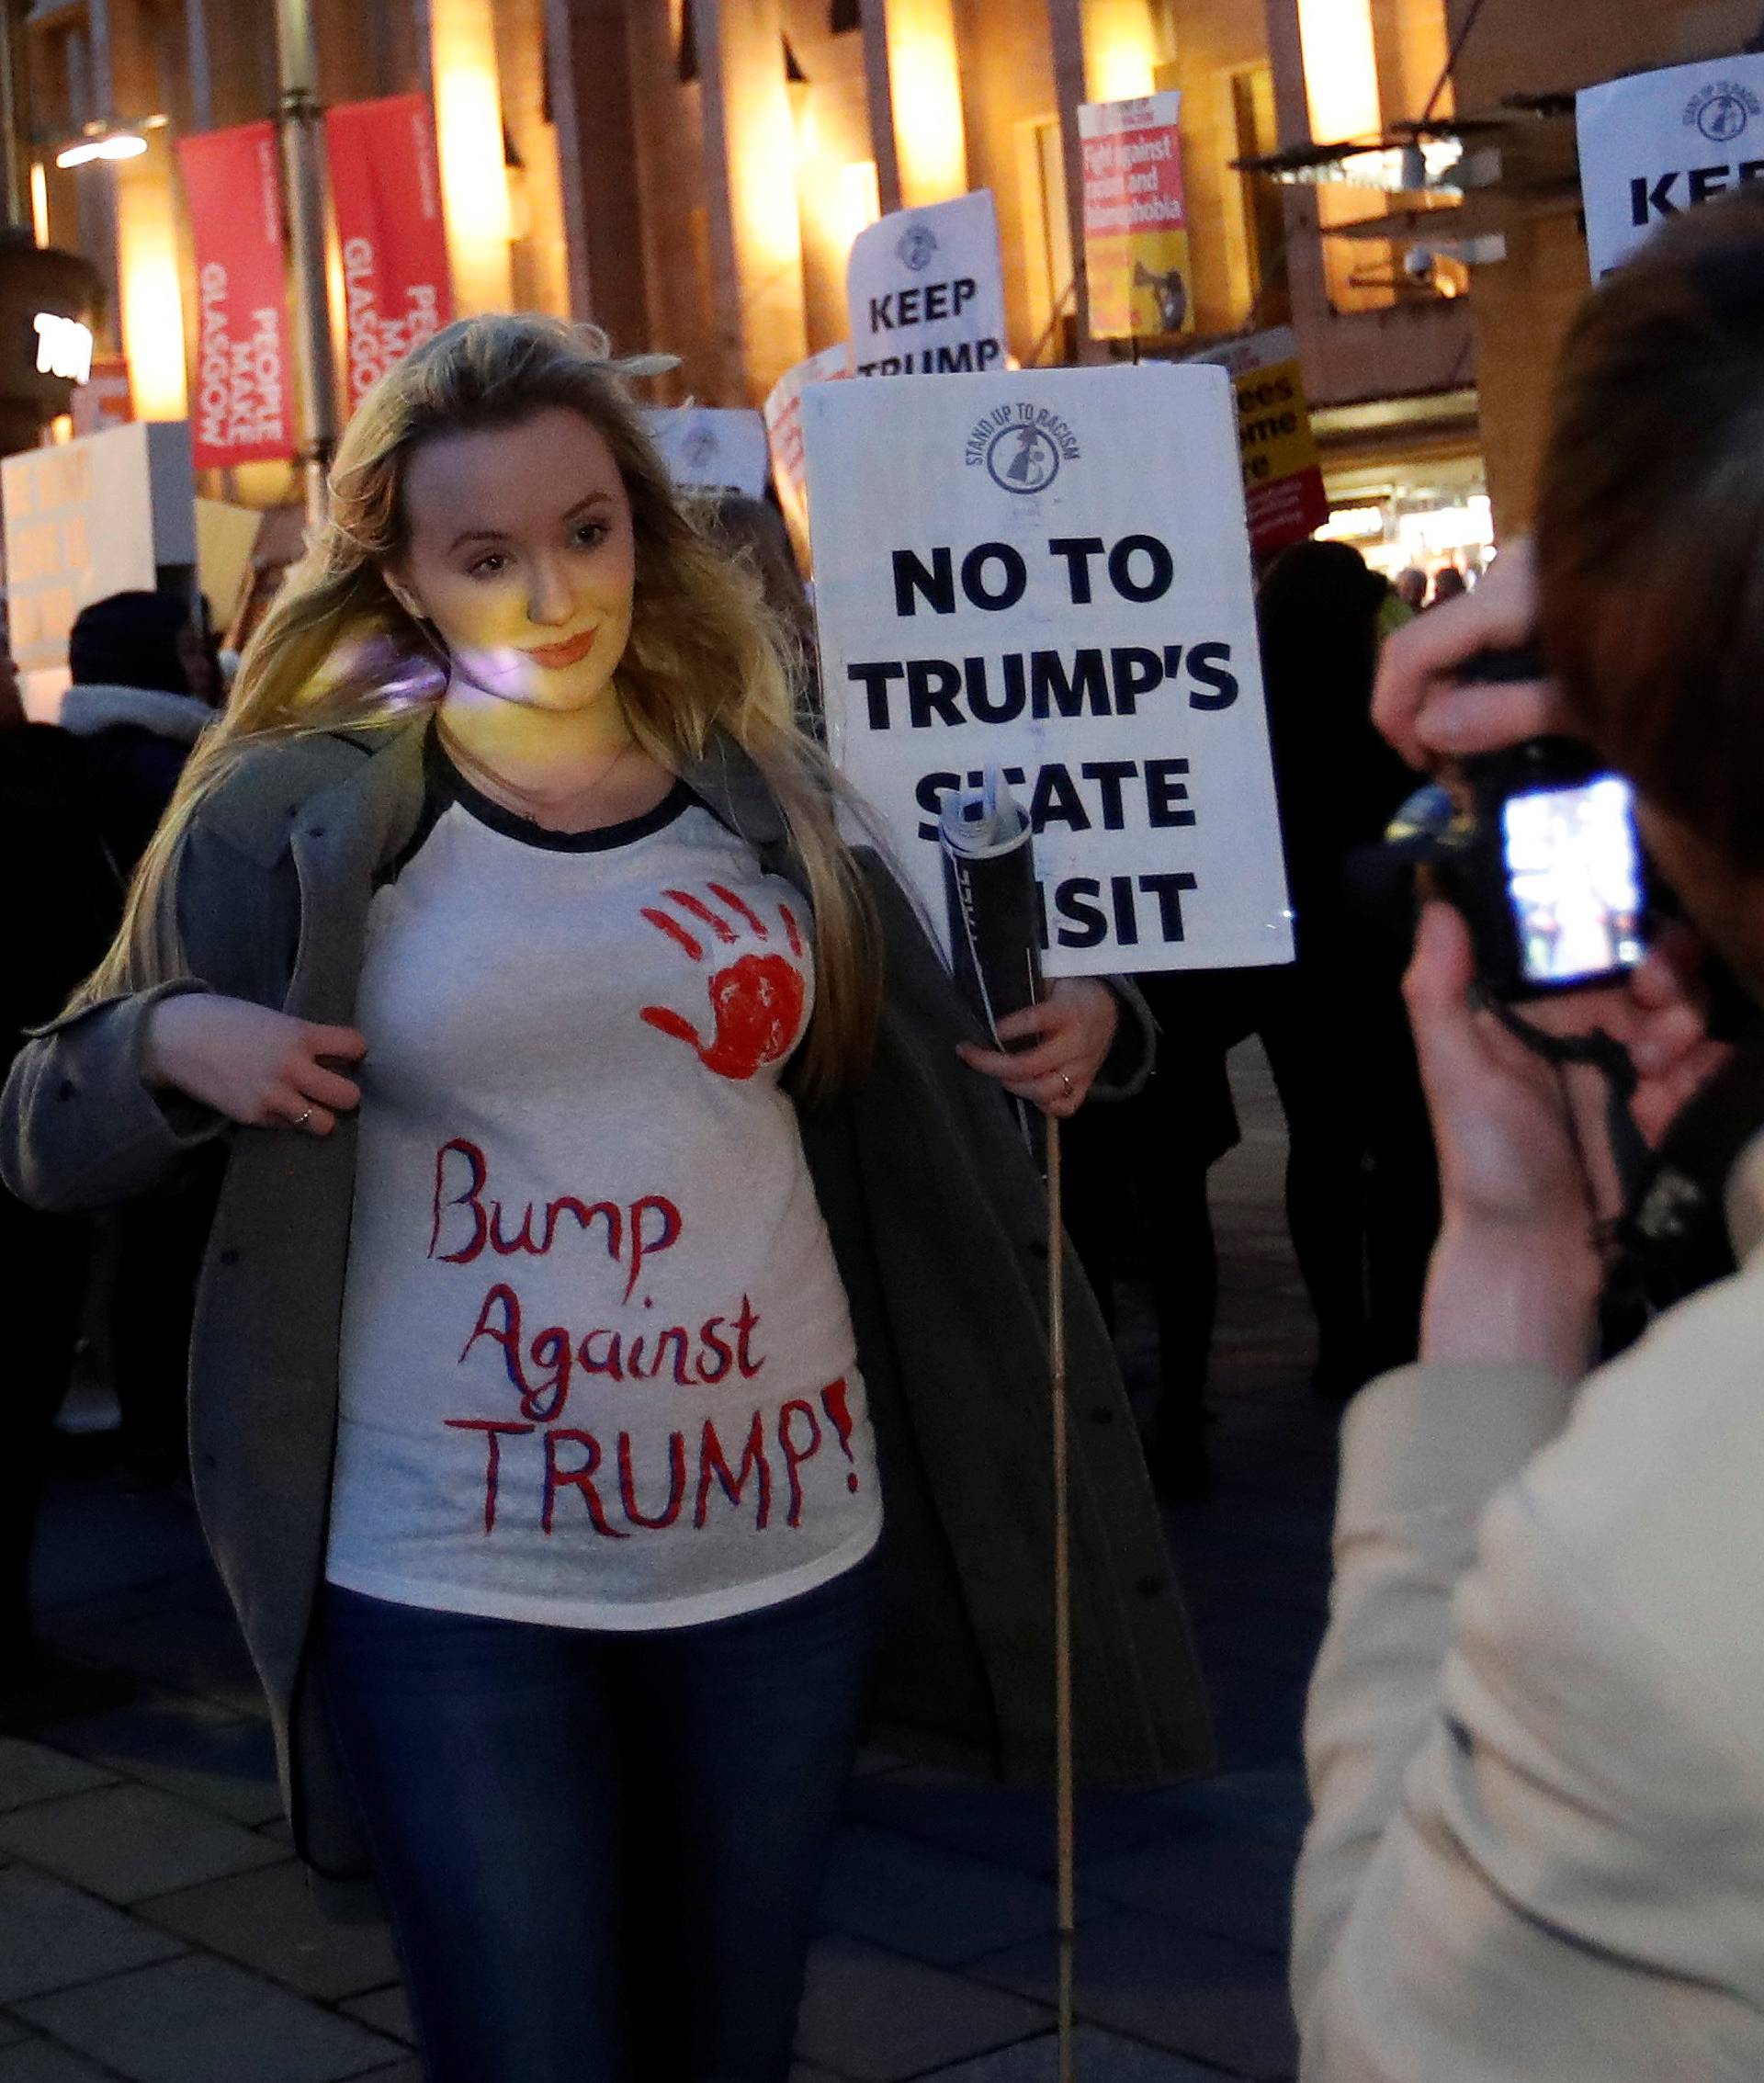 Demonstrators take part in a protest against U.S. President Donald Trump in Glasgow